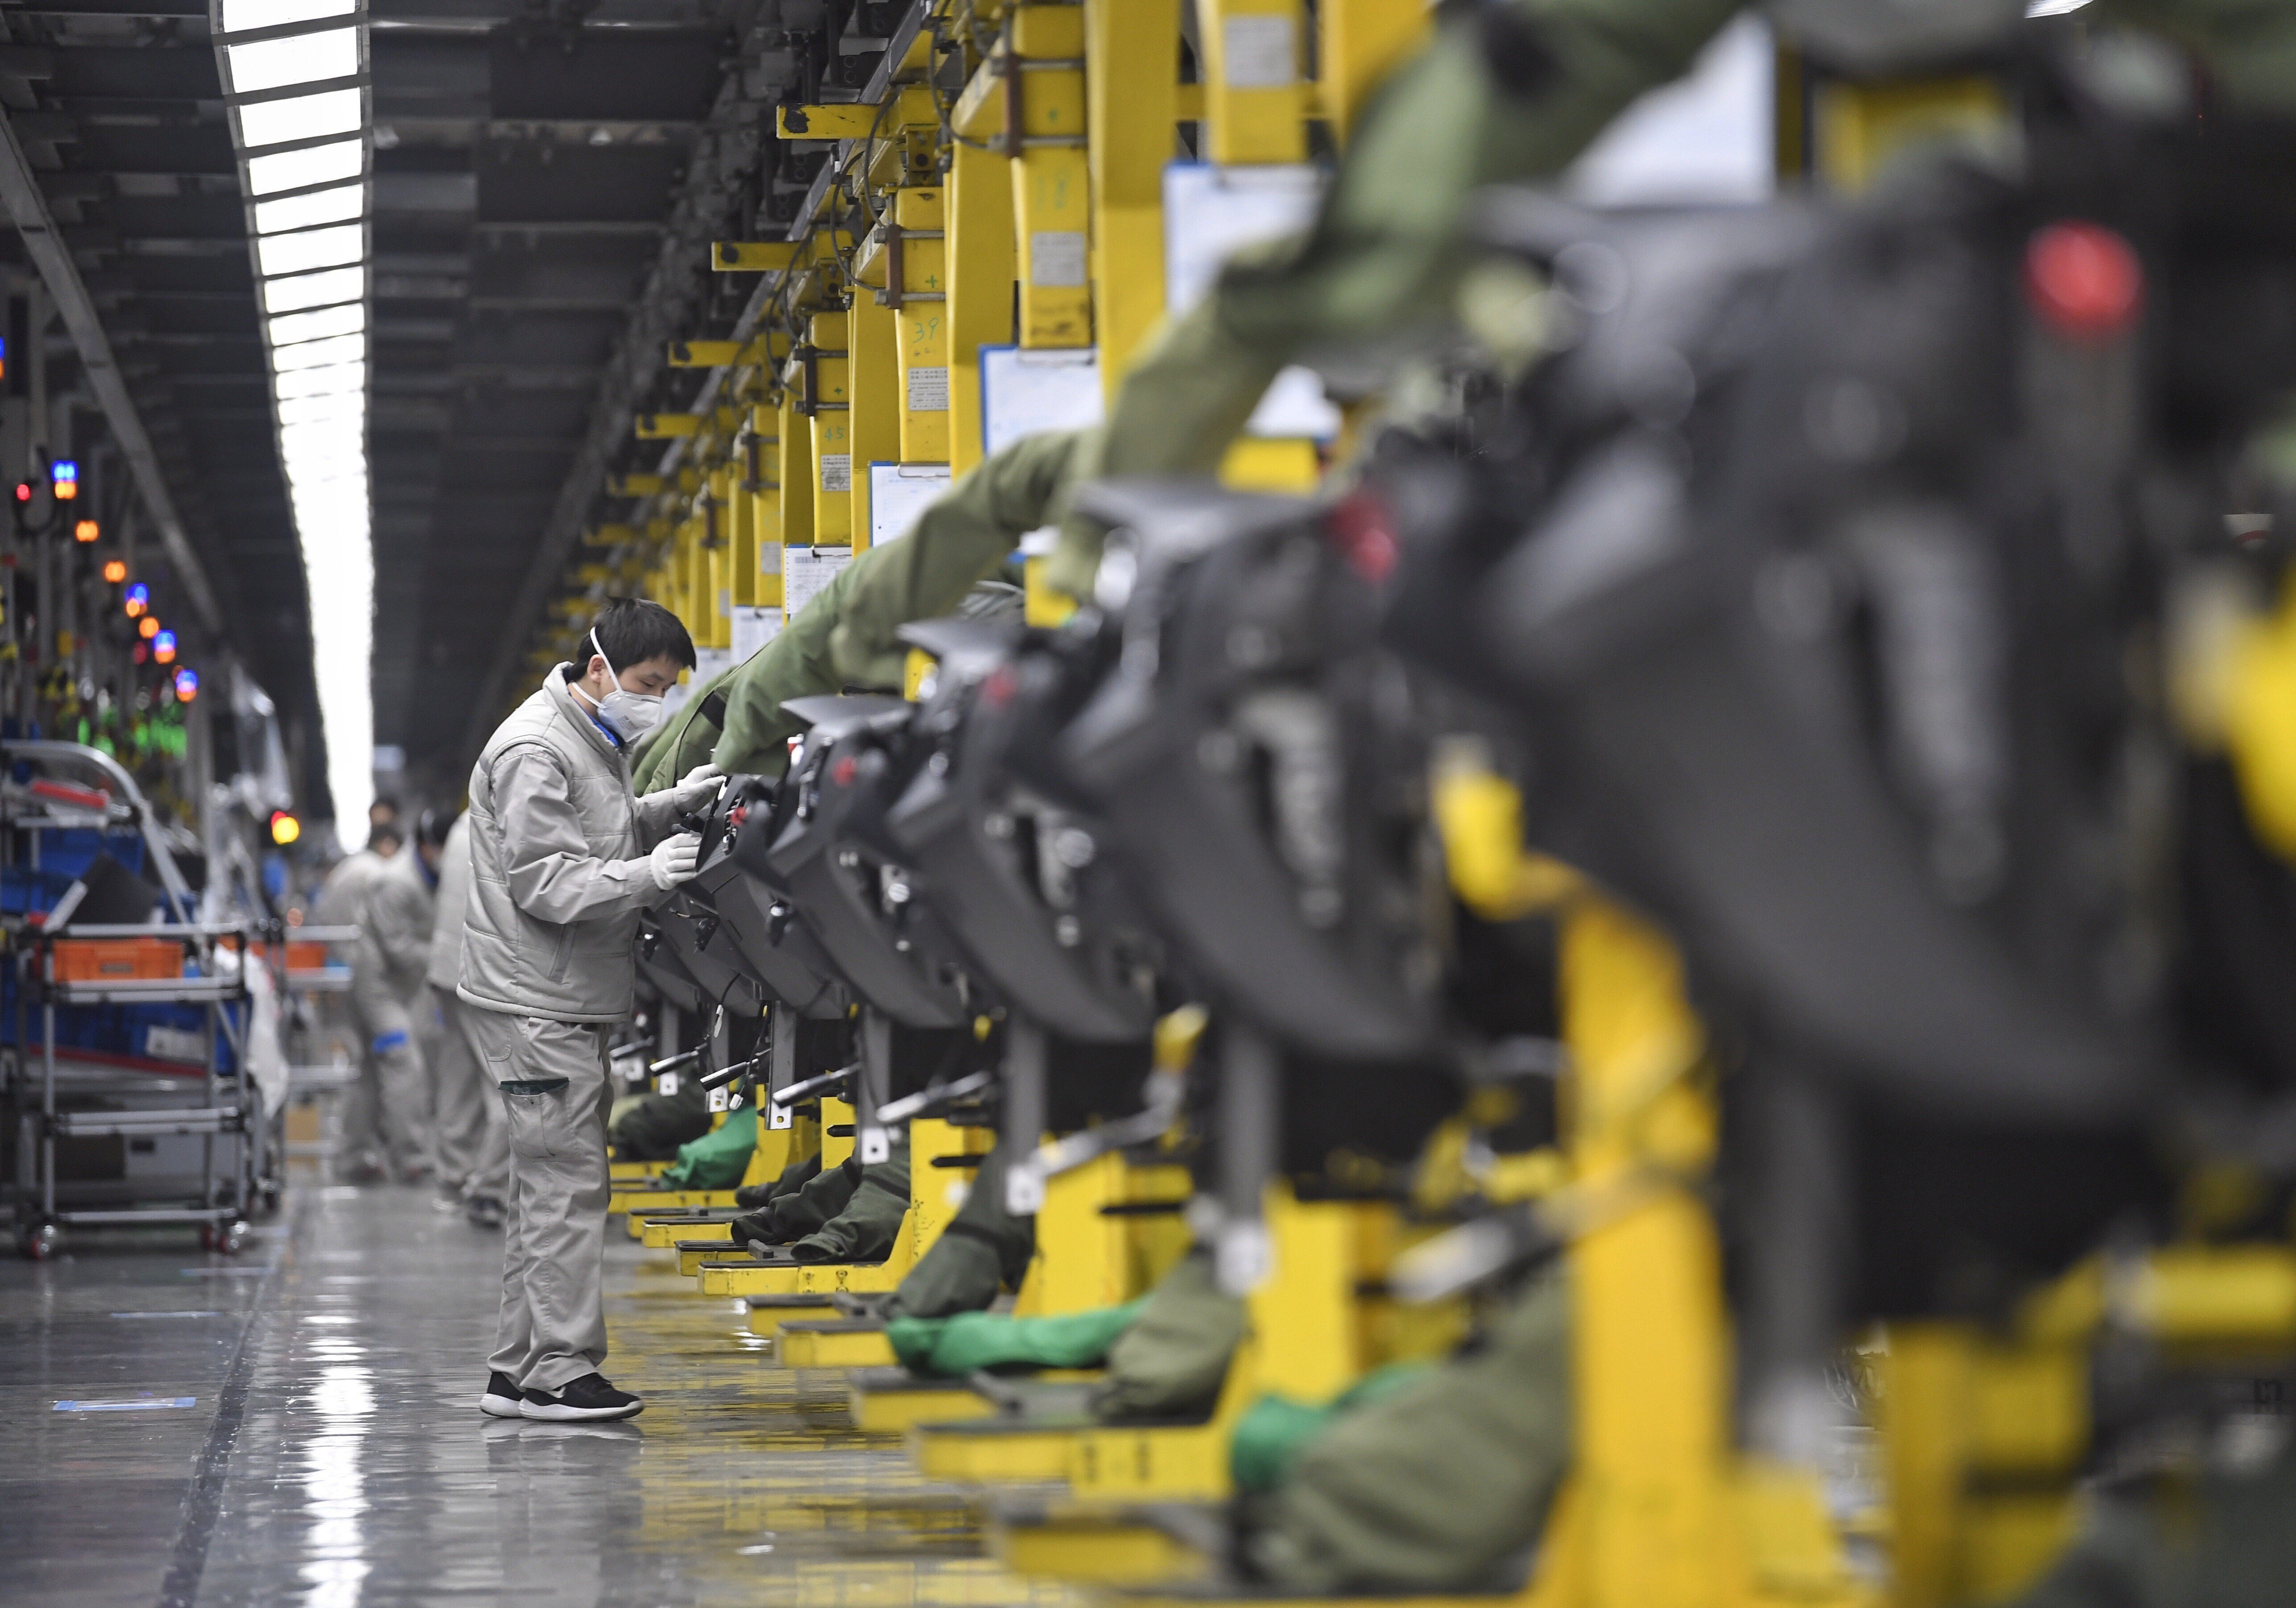 Employees work on the assembly plant of FAW-Volkswagen Automobile in Chengdu, southwest China’s Sichuan province, on February 19, 2020. A survey in March of 237 companies found all reported that their supply chains had been affected by Covid-19. Photo: Xinhua